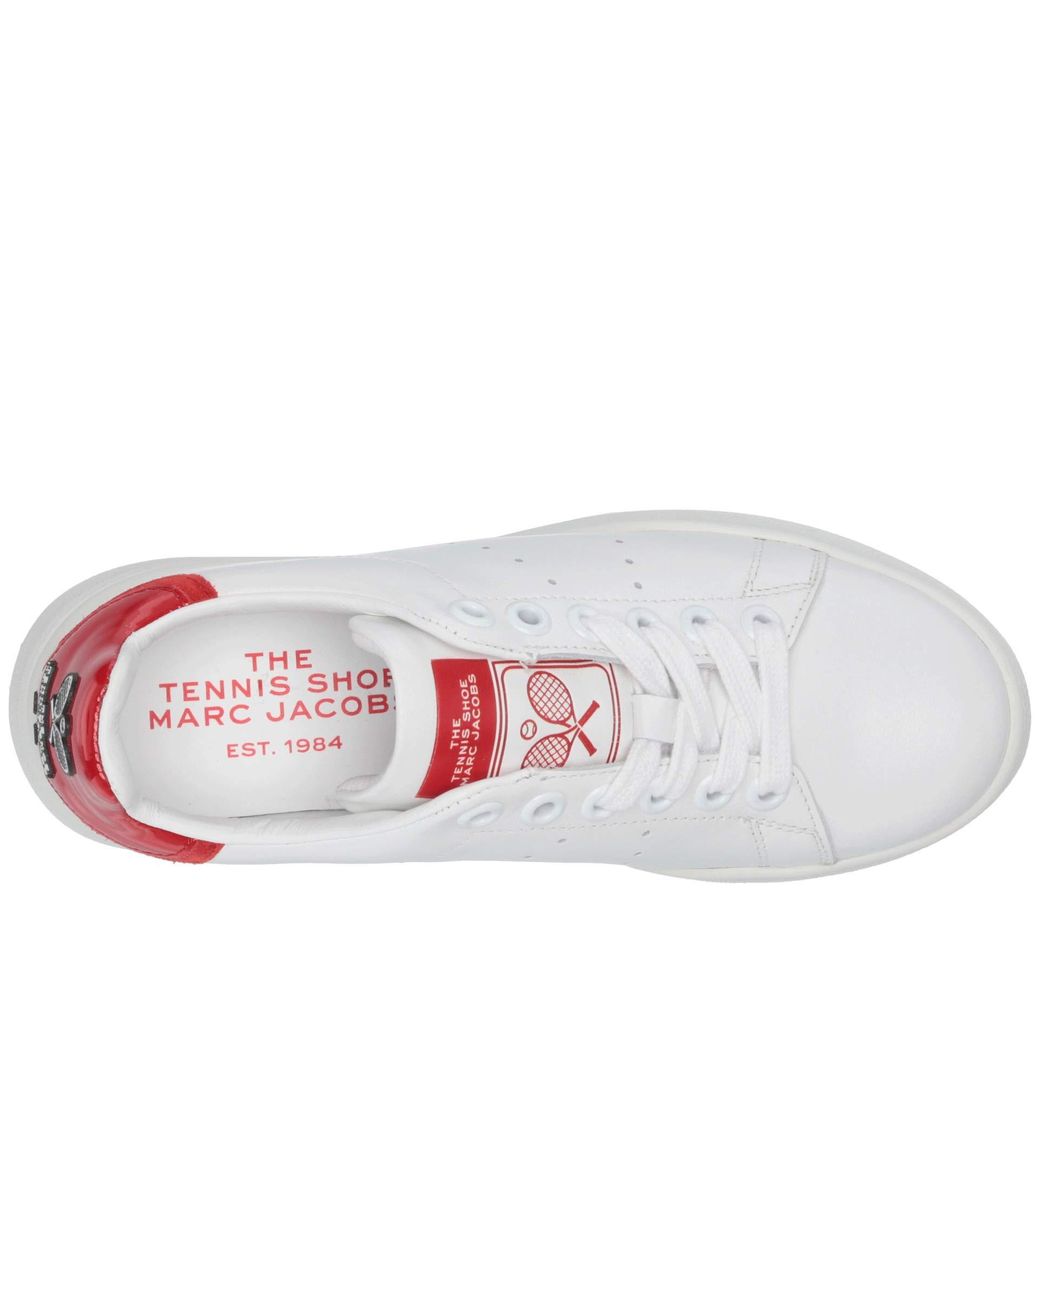 Marc Jacobs The Tennis Shoe in White/Red (White) | Lyst